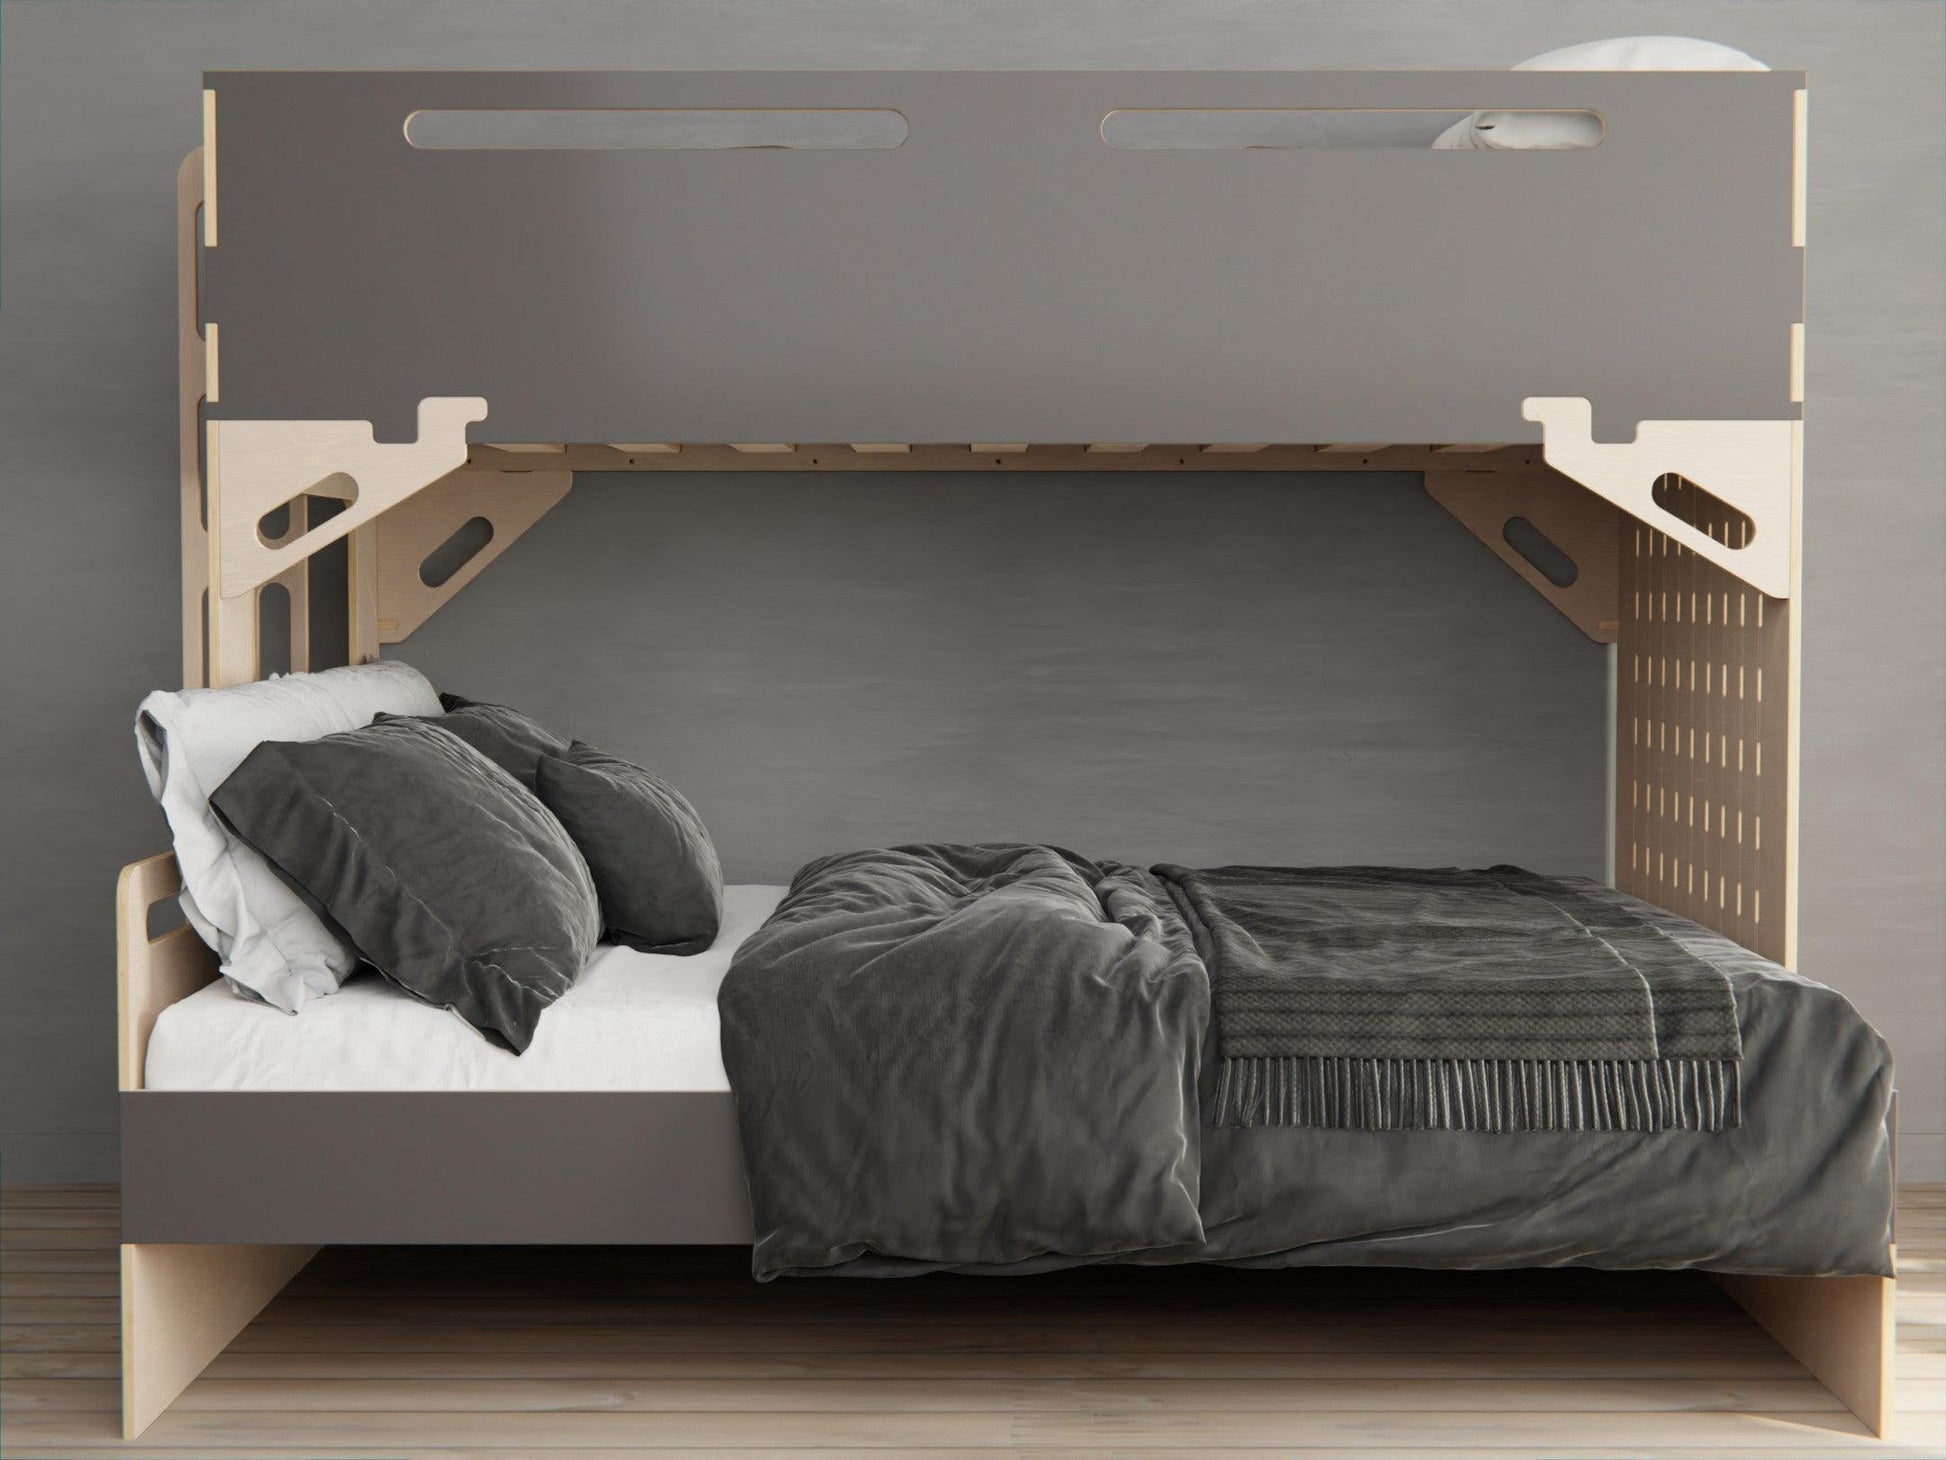 Maximize space and comfort with our plywood triple bunk beds. A sleek solution for shared bedrooms.